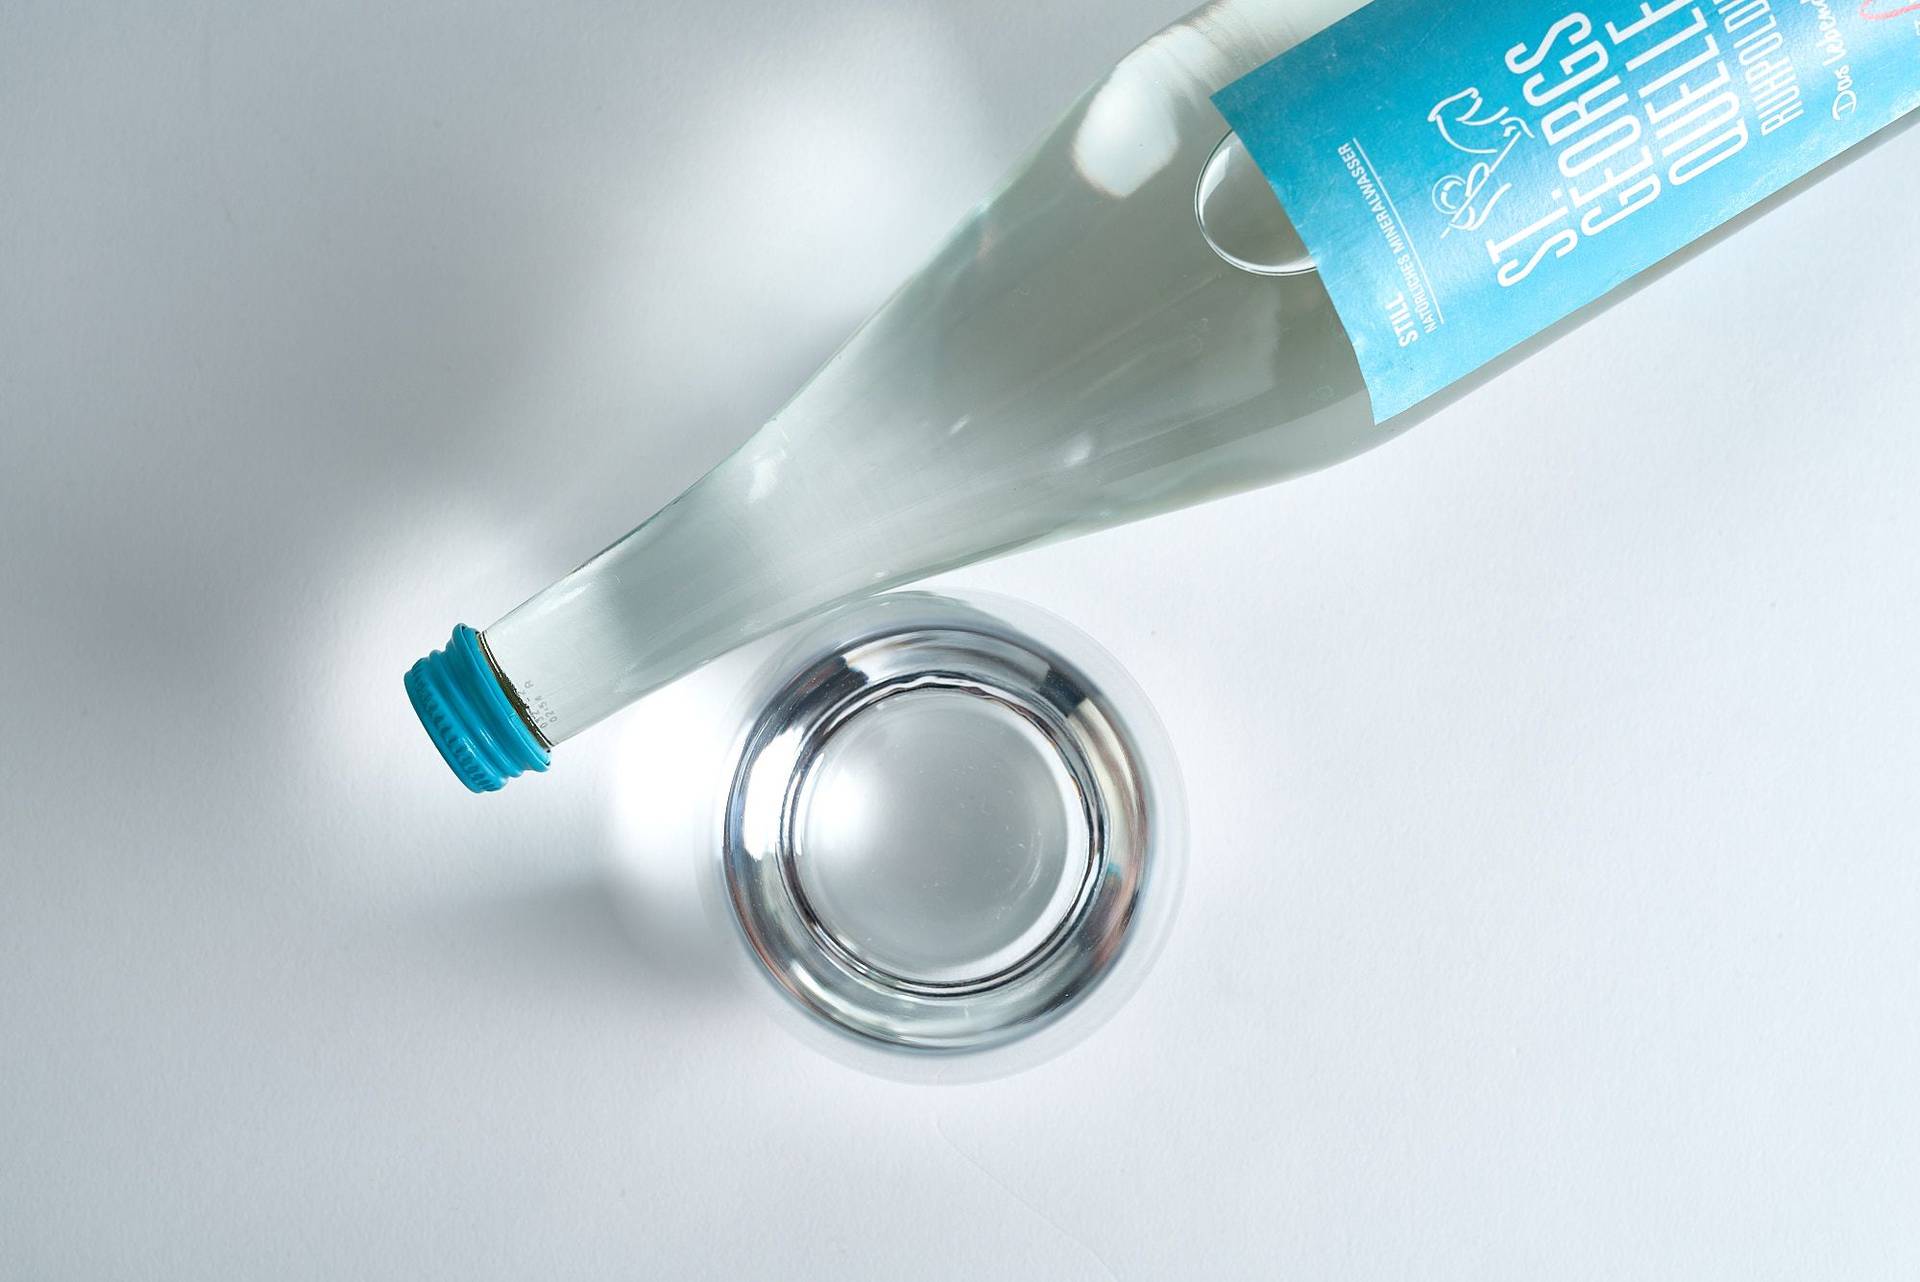 mineral water bottle and glass on white background